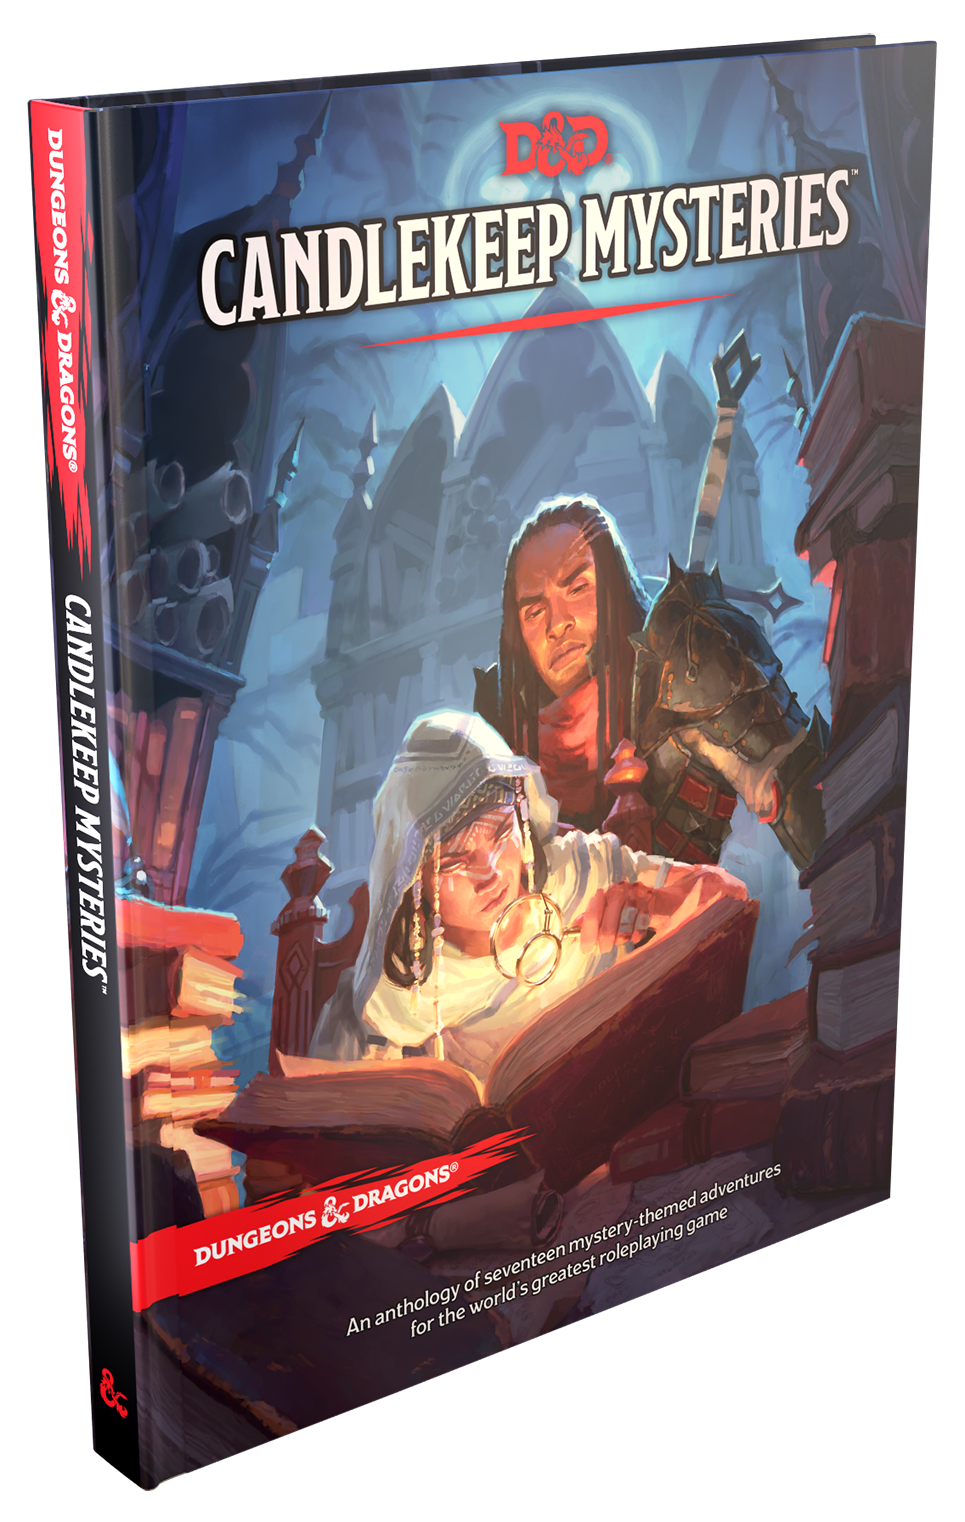 Dungeons & Dragons 5th edition - Candlekeep Mysteries